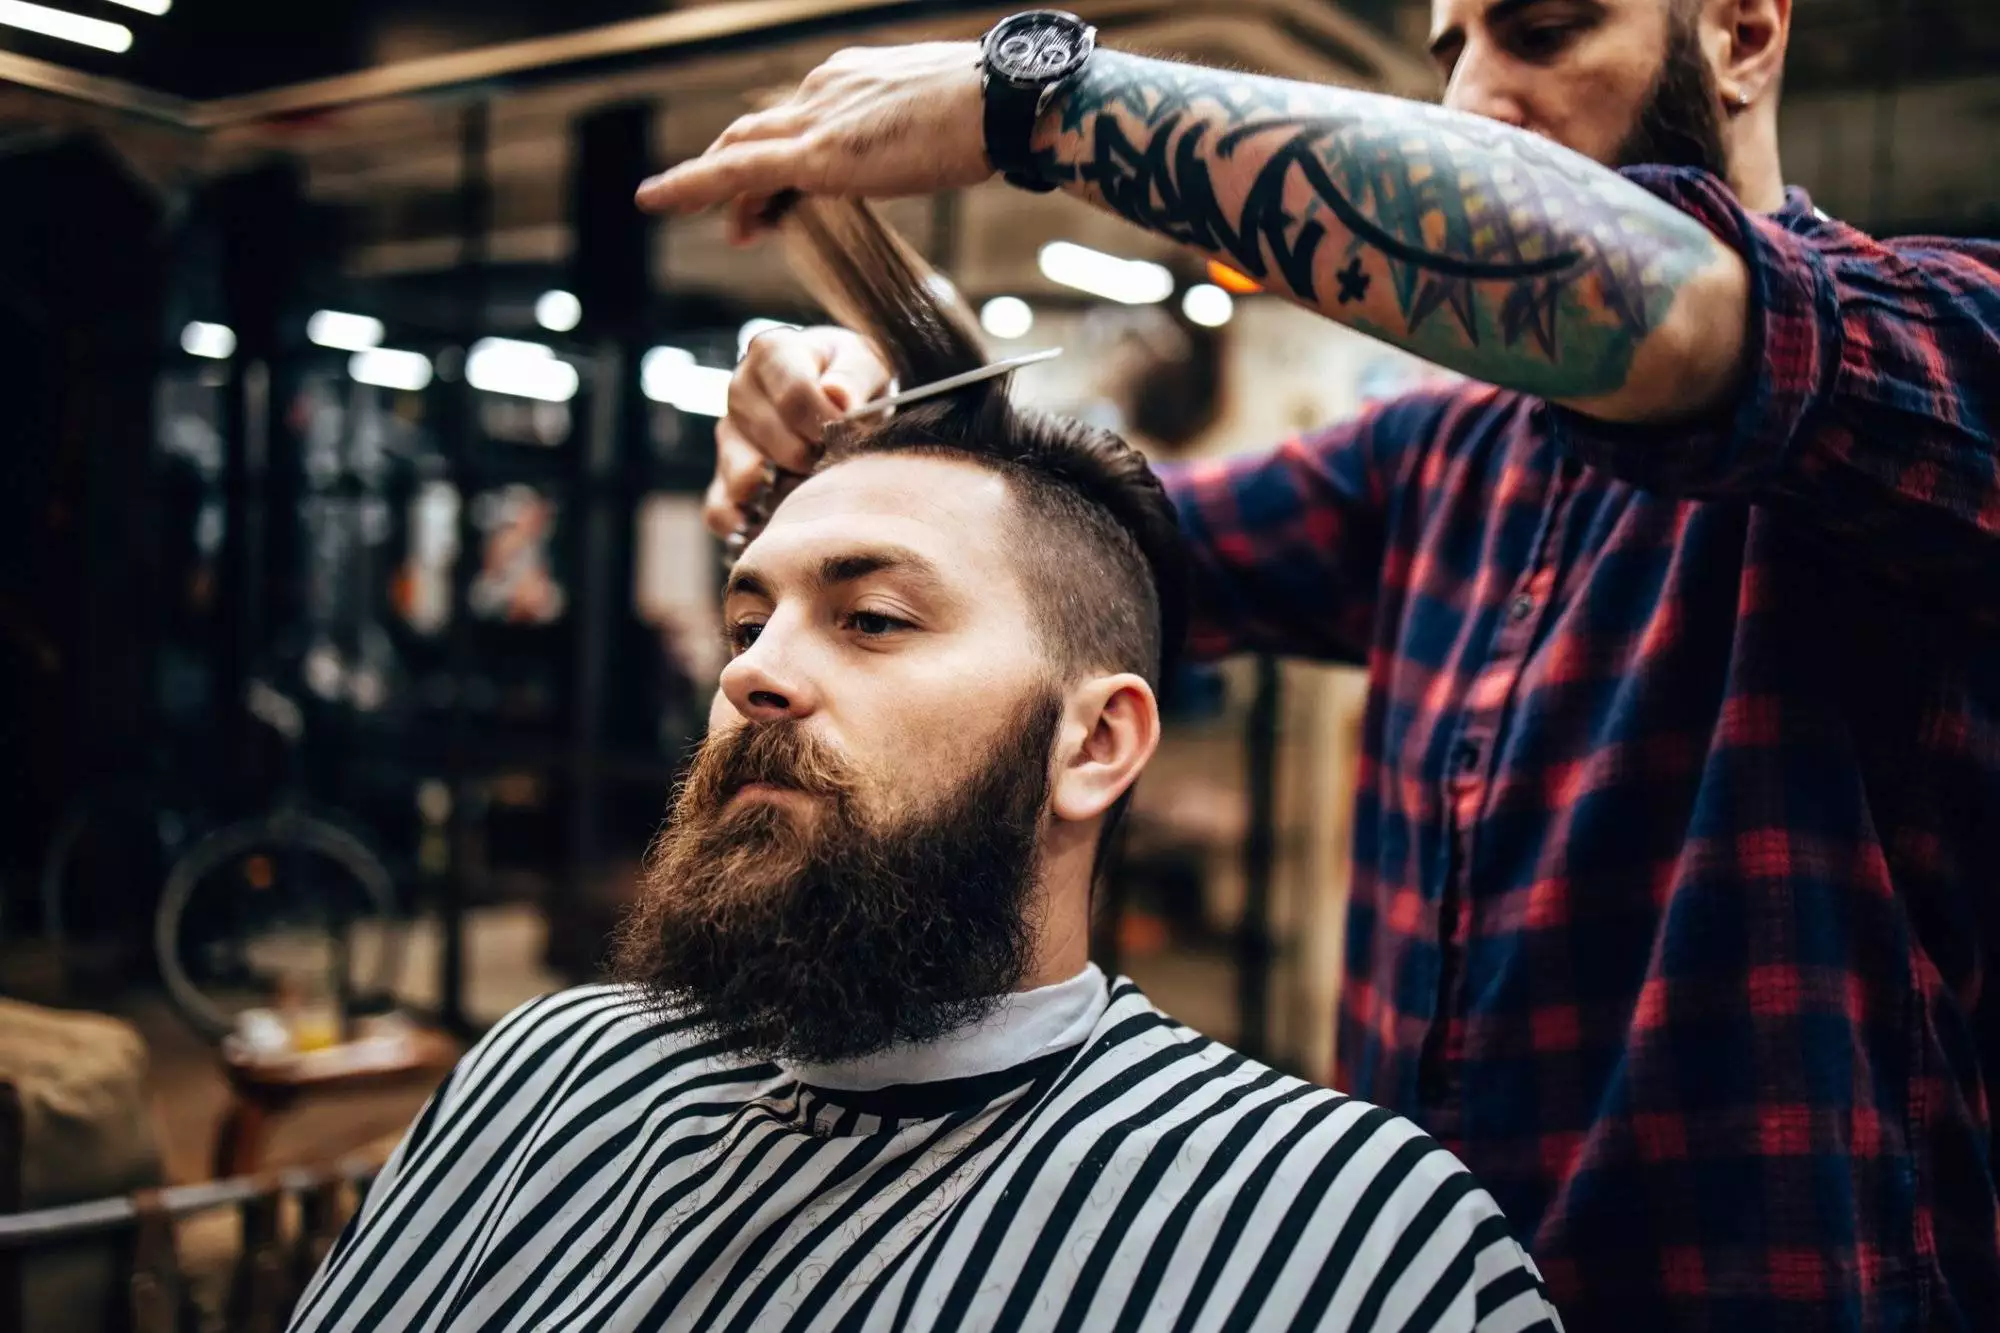 Handsome middle age man receiving hair cutting and styling treatment in a vintage barber shop.